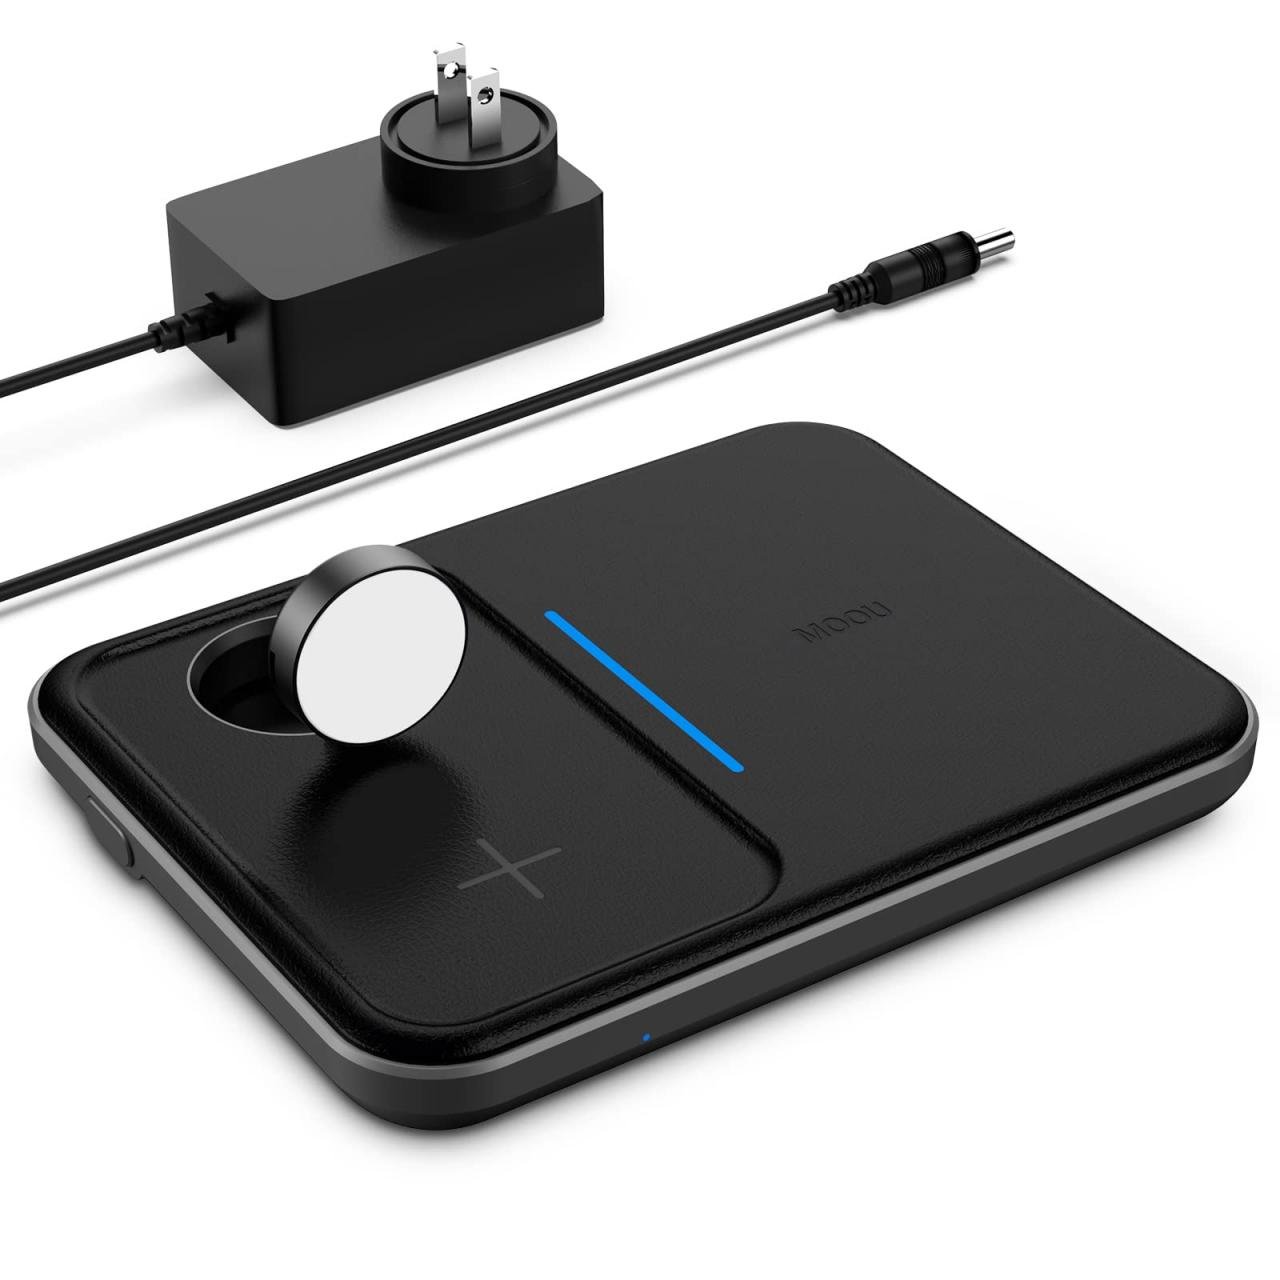 Moou Wireless Charging Station For Apple Products With Power Adapter